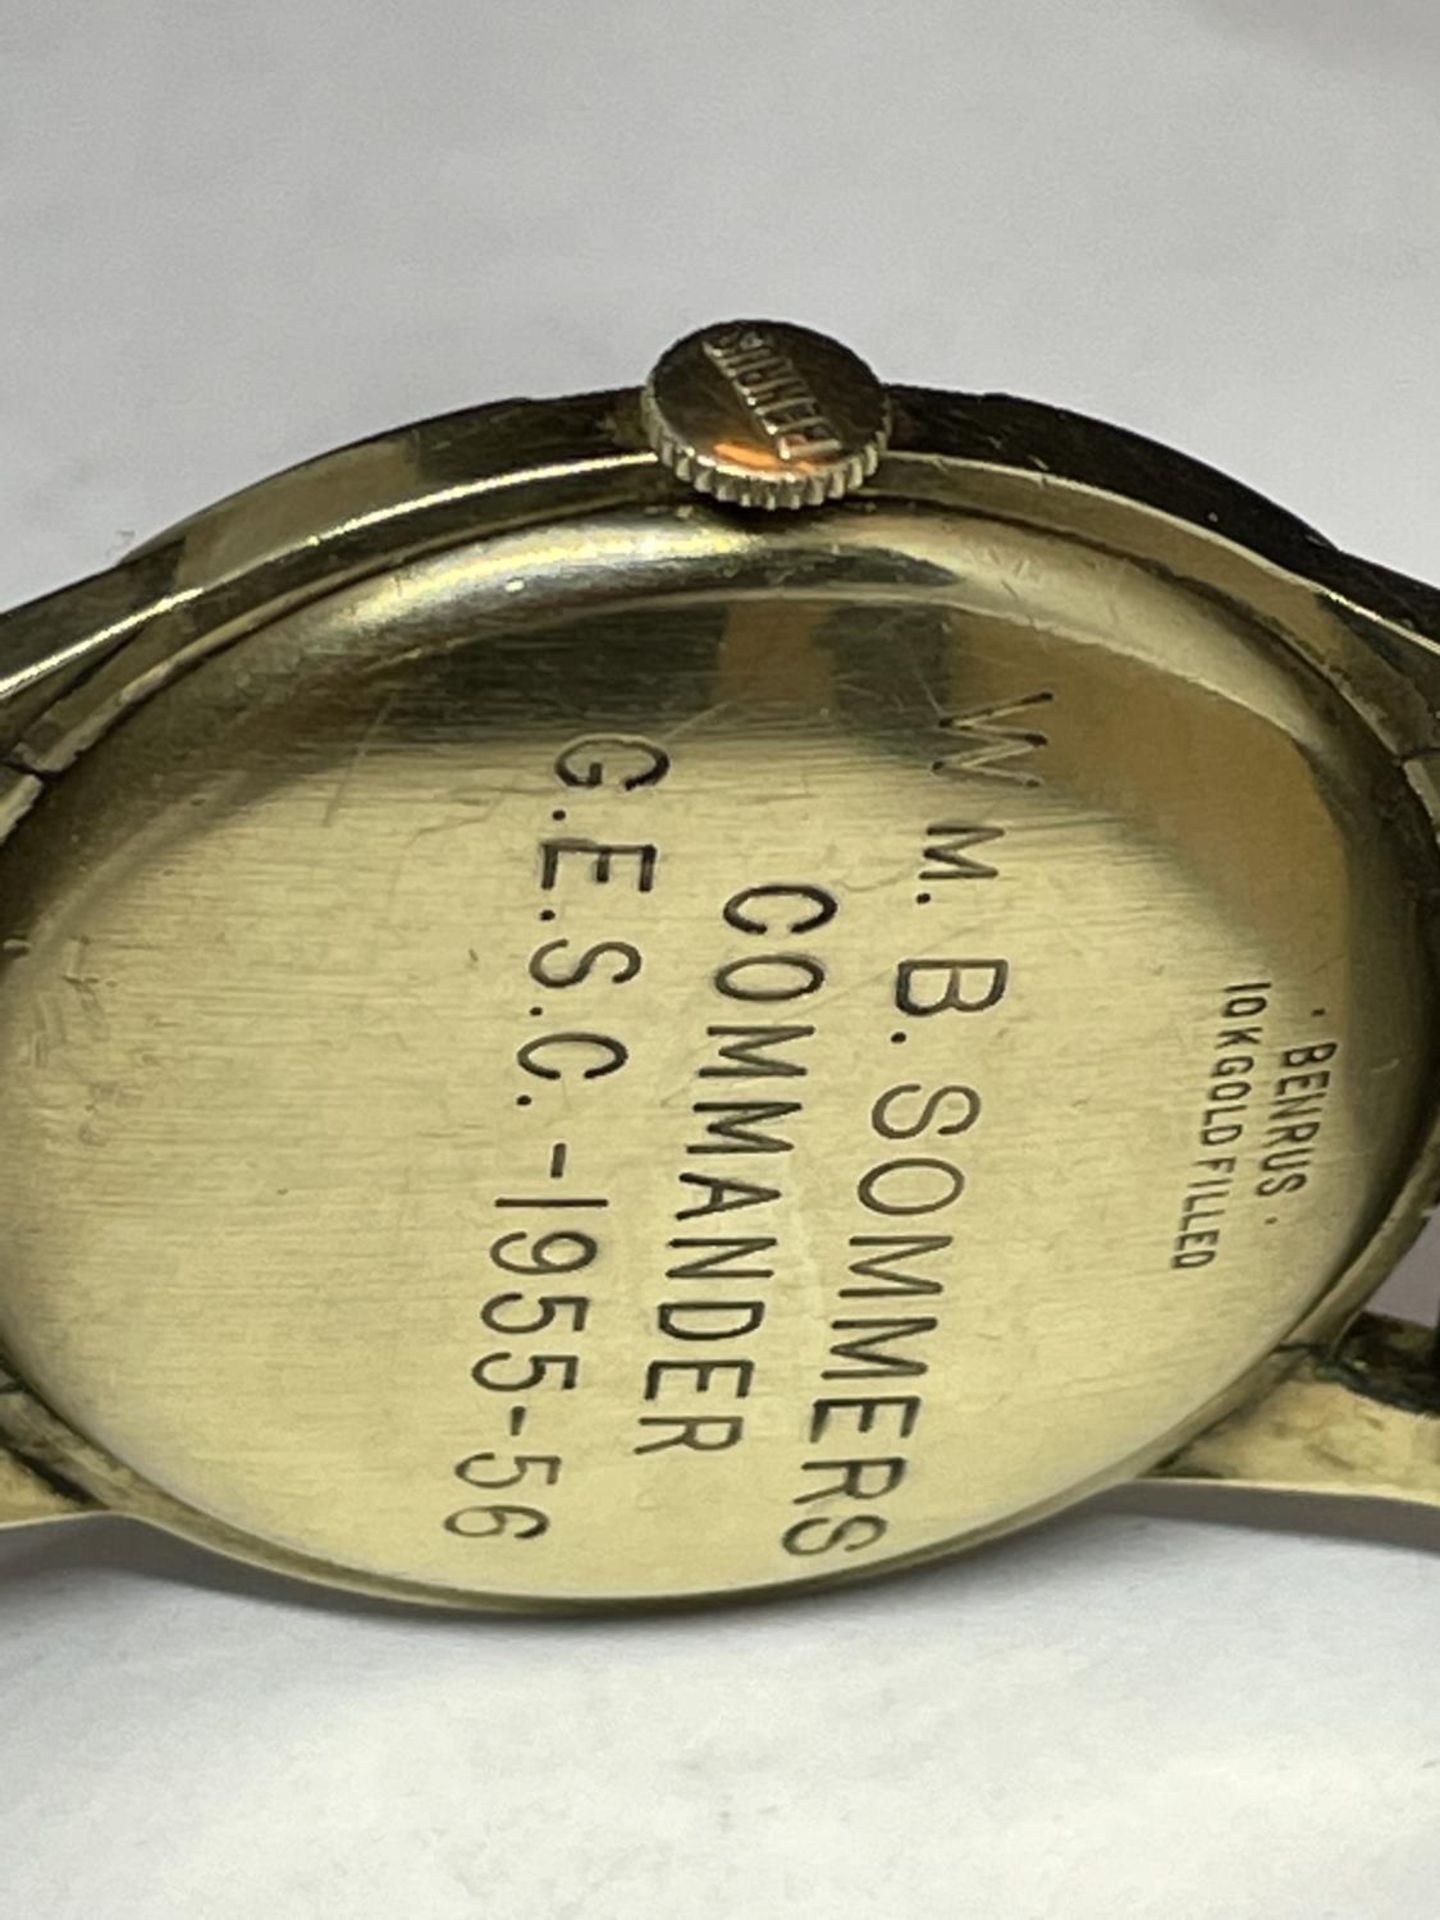 A BENRUS VINTAGE SUB DIAL WRIST WATCH SEEN WORKING BUT NO WARRANTY ENGRAVED - Image 8 of 9